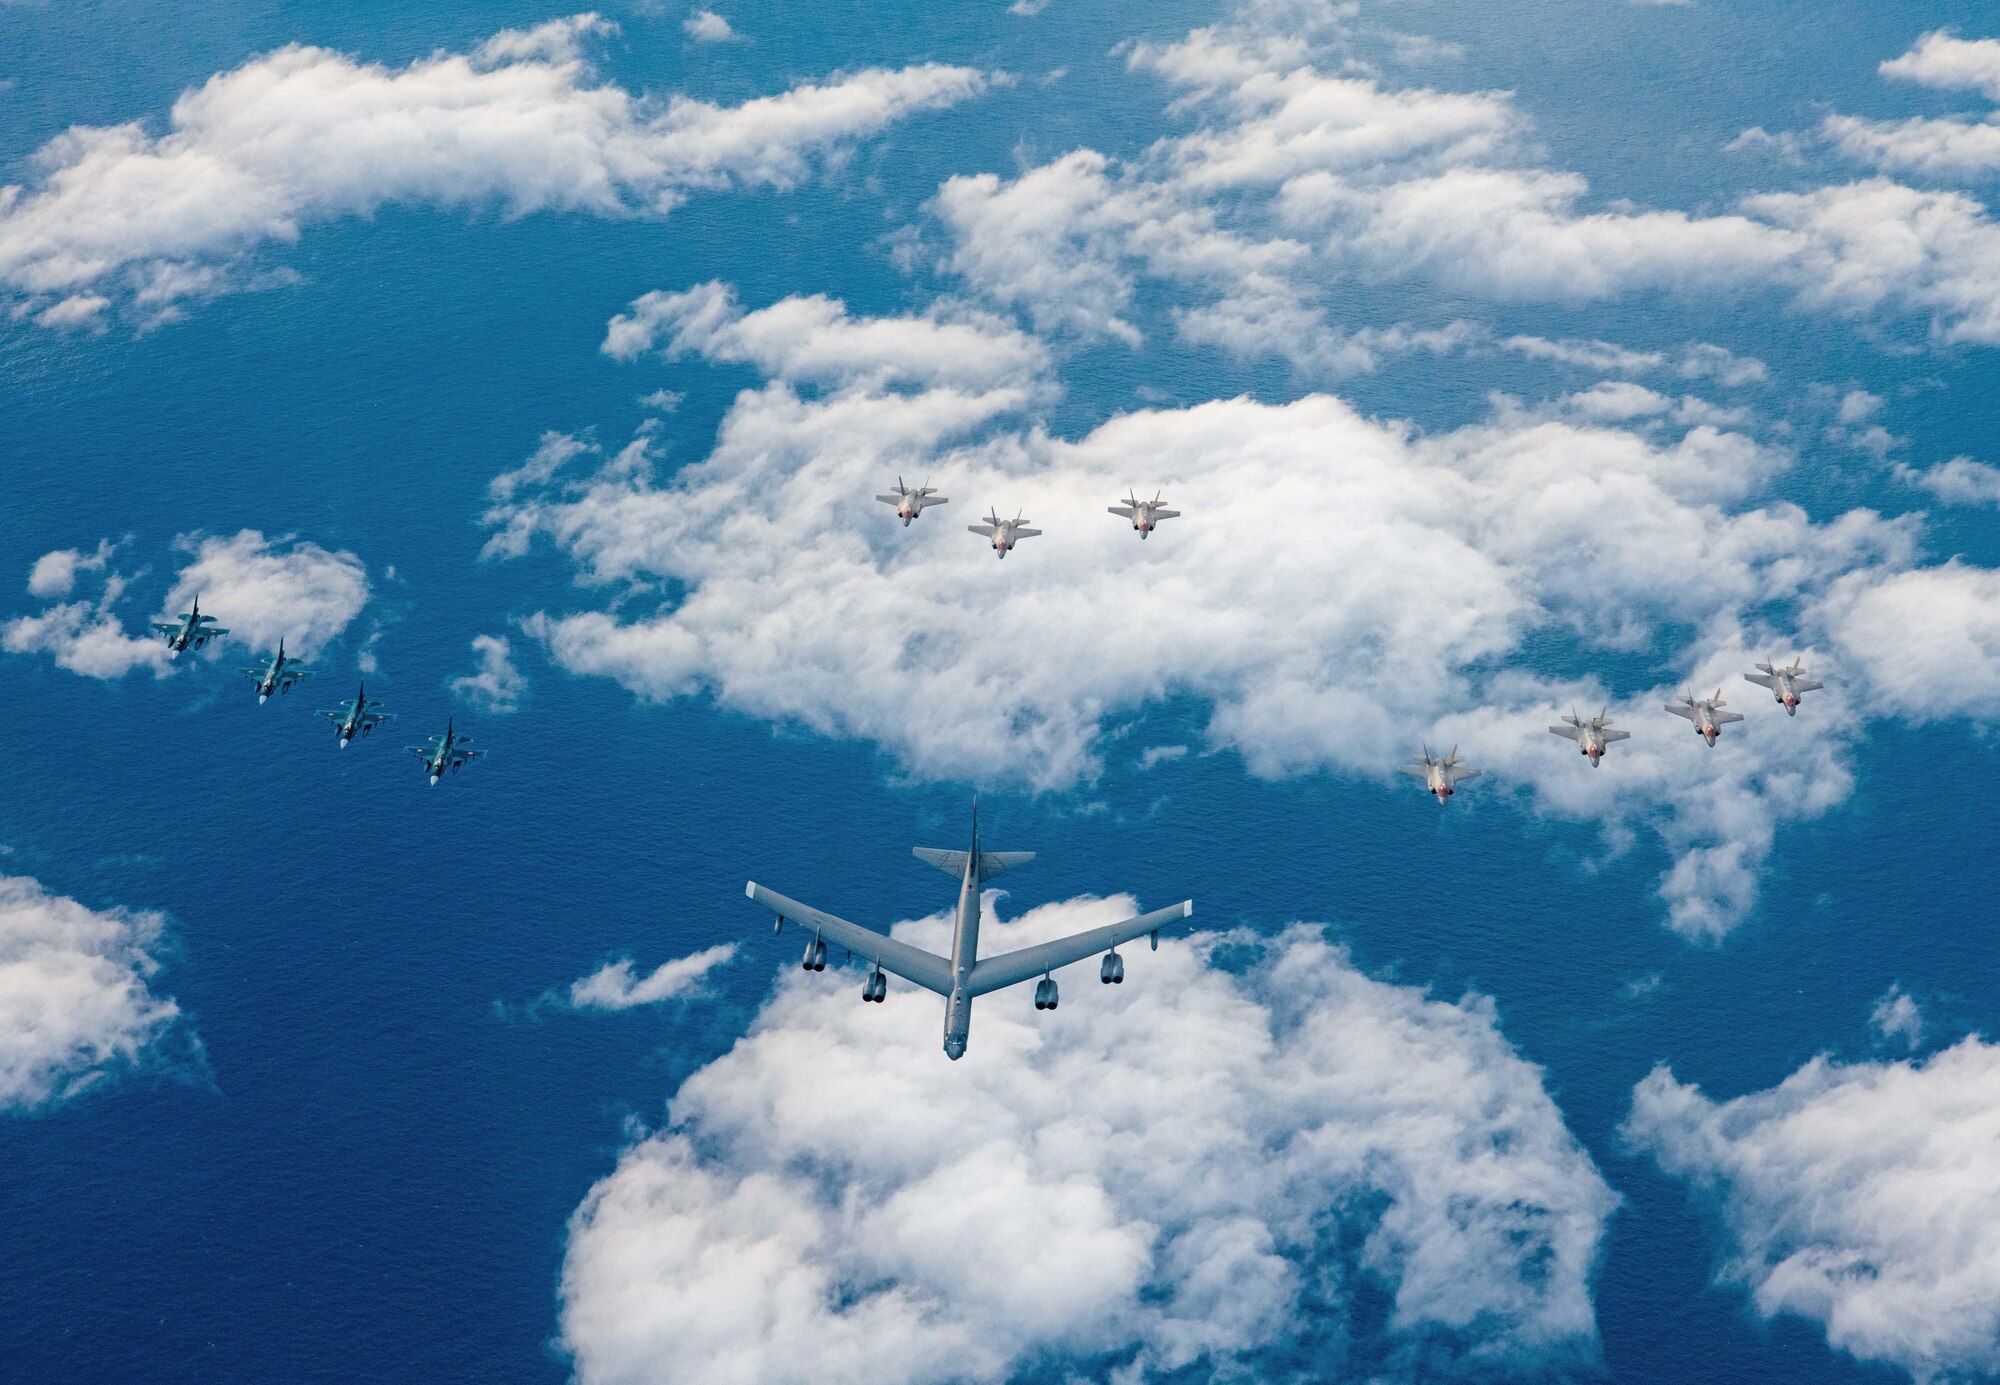 Four Japanese Air Self Defense Force F-2s, one U.S. Air Force B-52H Stratofortress, and seven U.S. Air Force F-35A Lightning IIs fly in formation over the Pacific Ocean